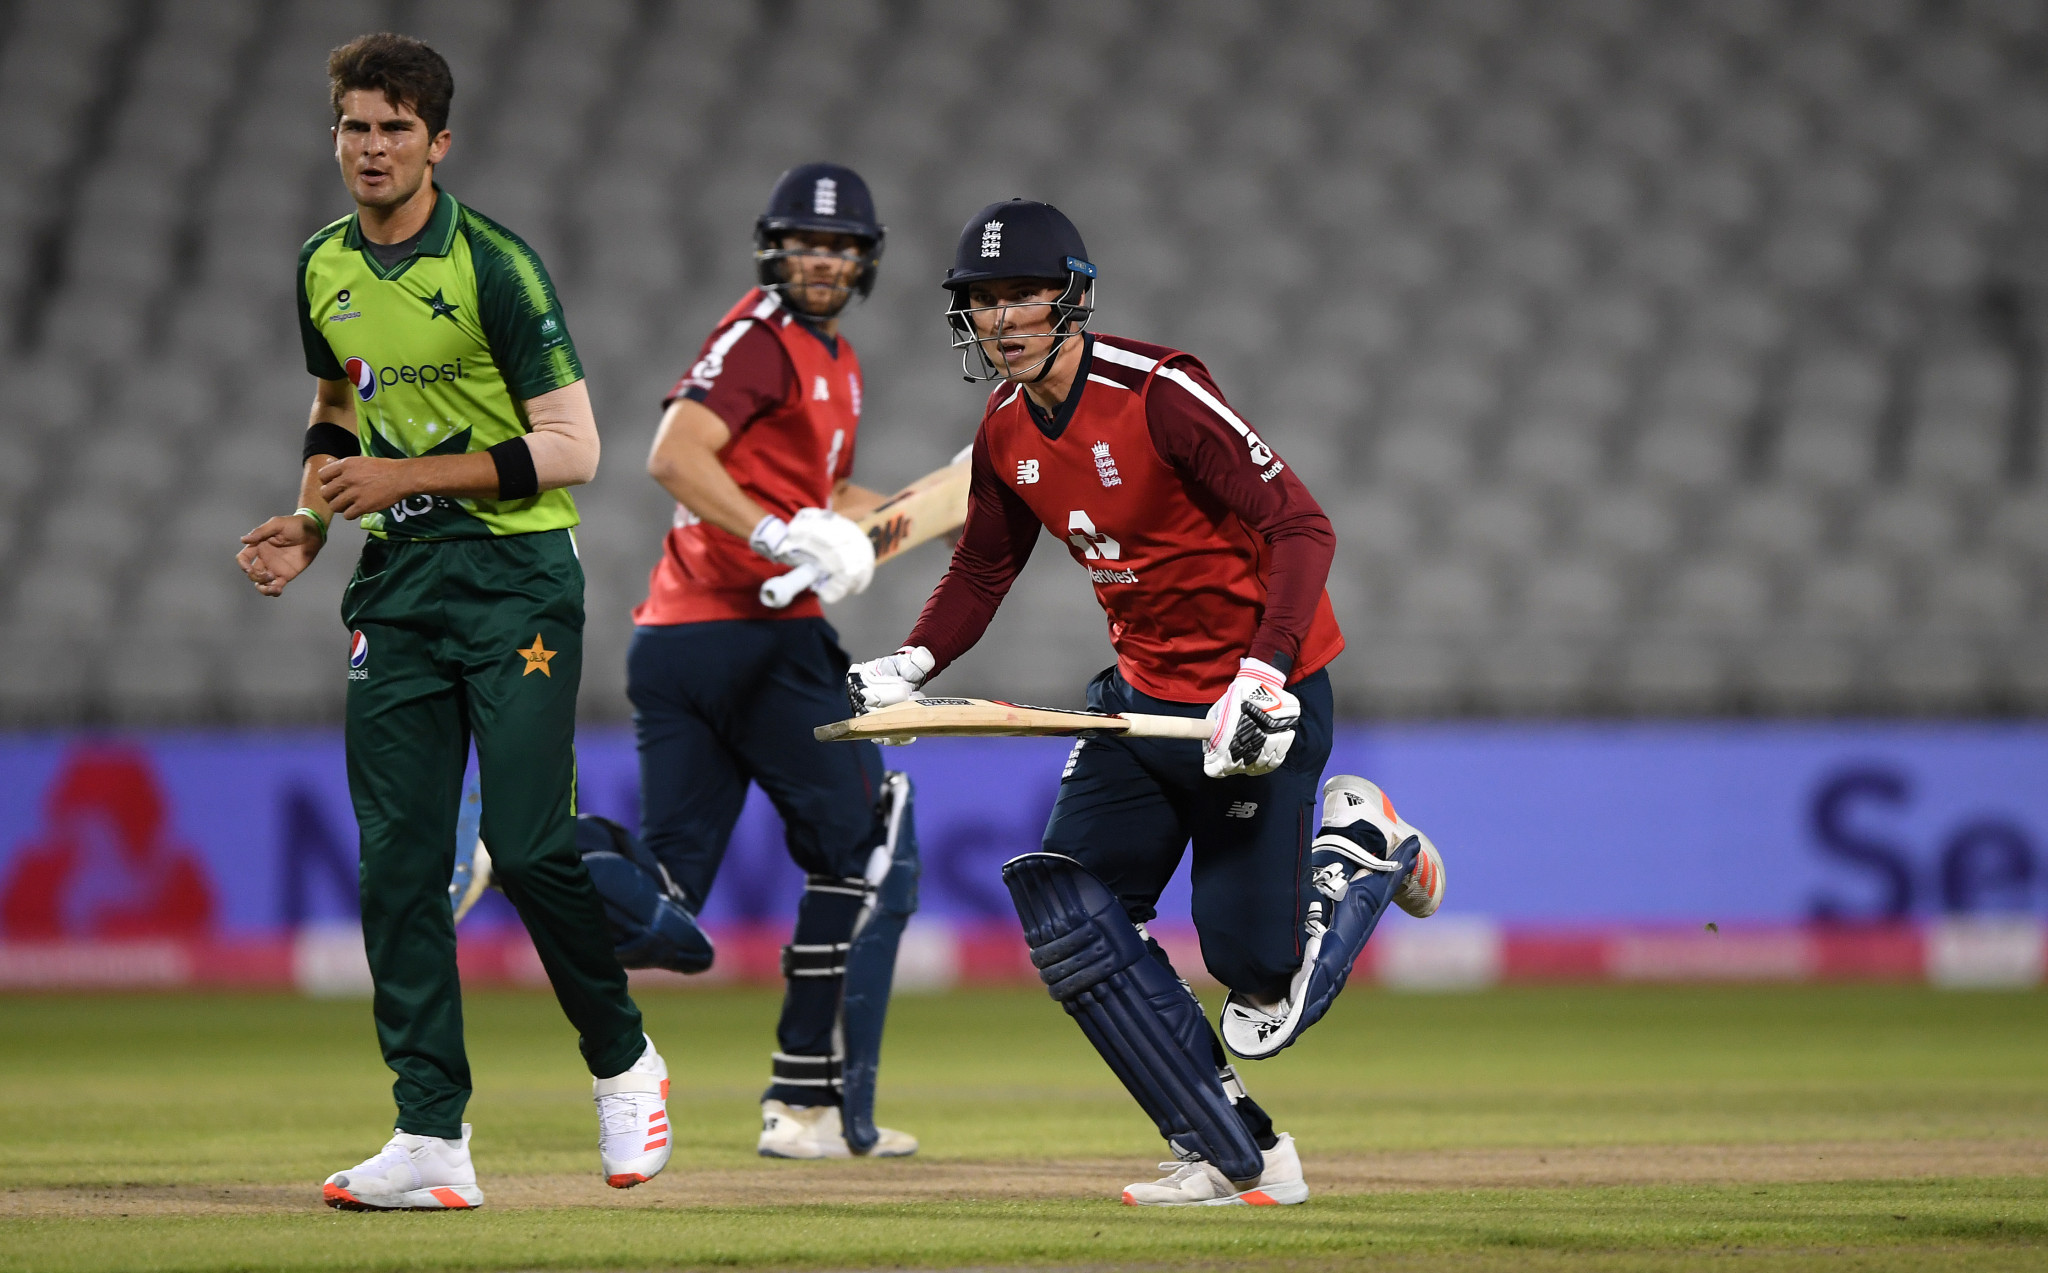 England are set to make their first visit to Pakistan in 16 years in October 2021 ©Getty Images